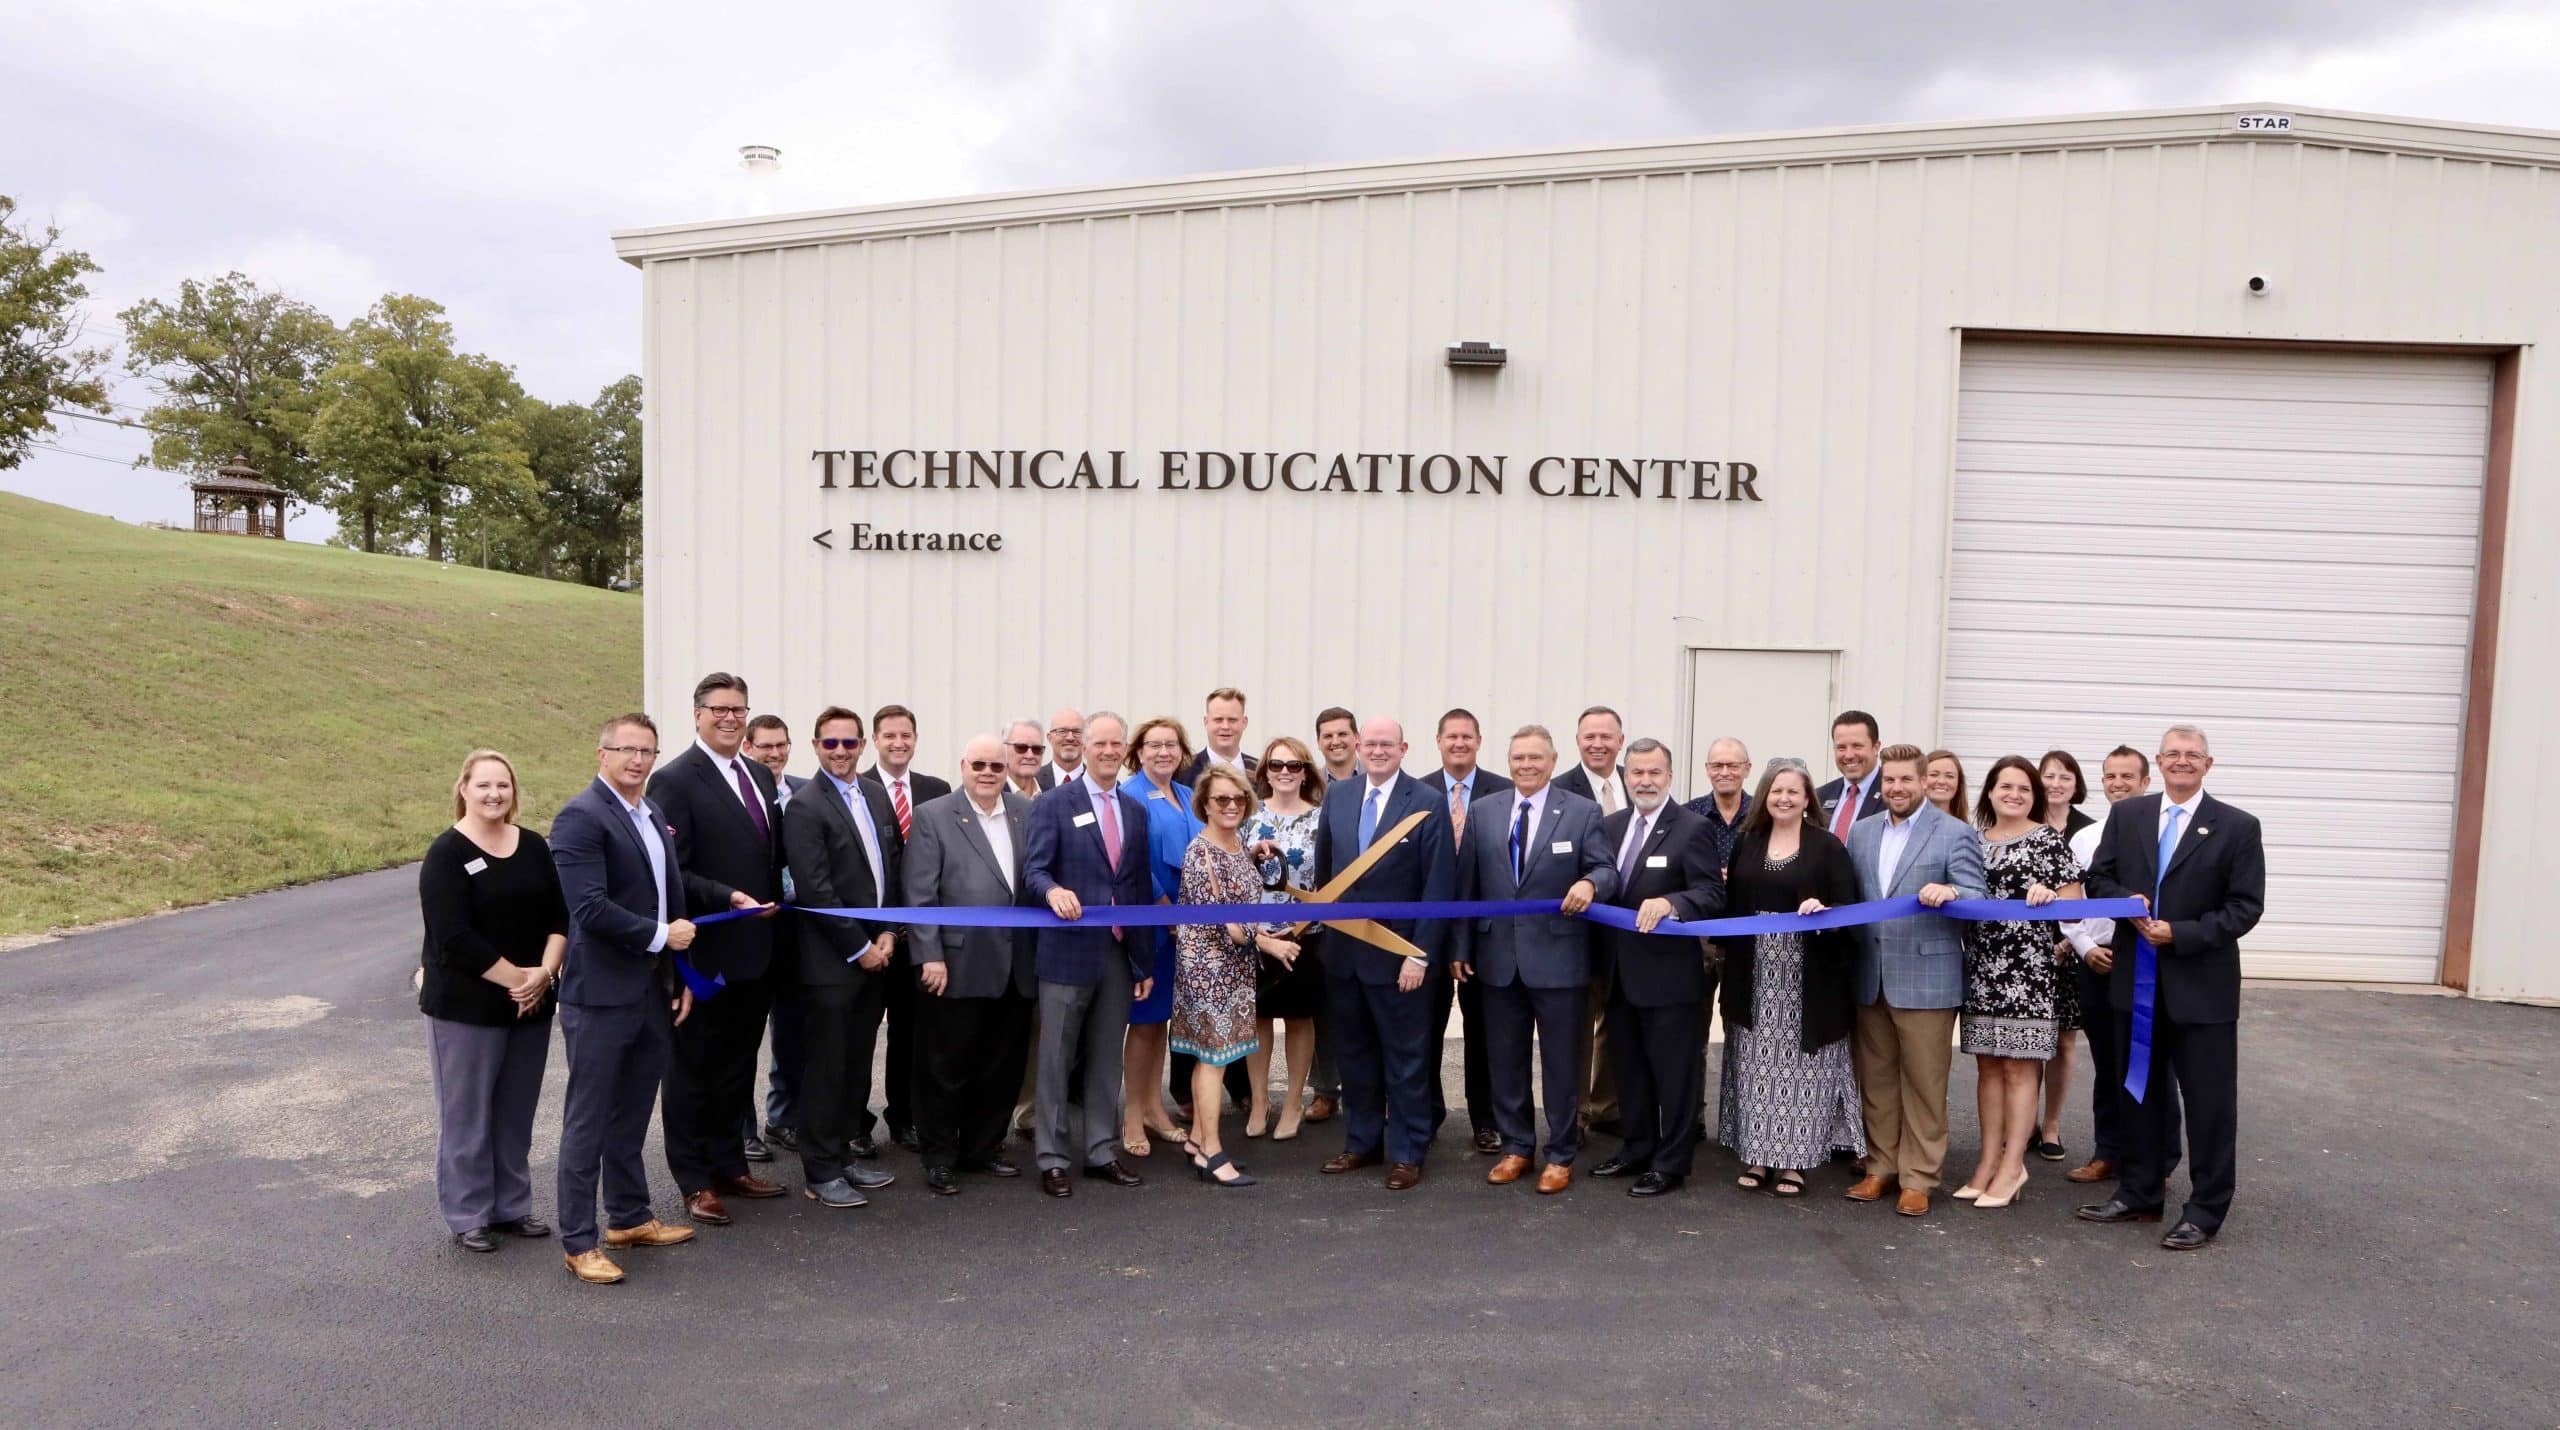 OTC officials and community partners cut the ribbon at the Table Rock Technical Education Center